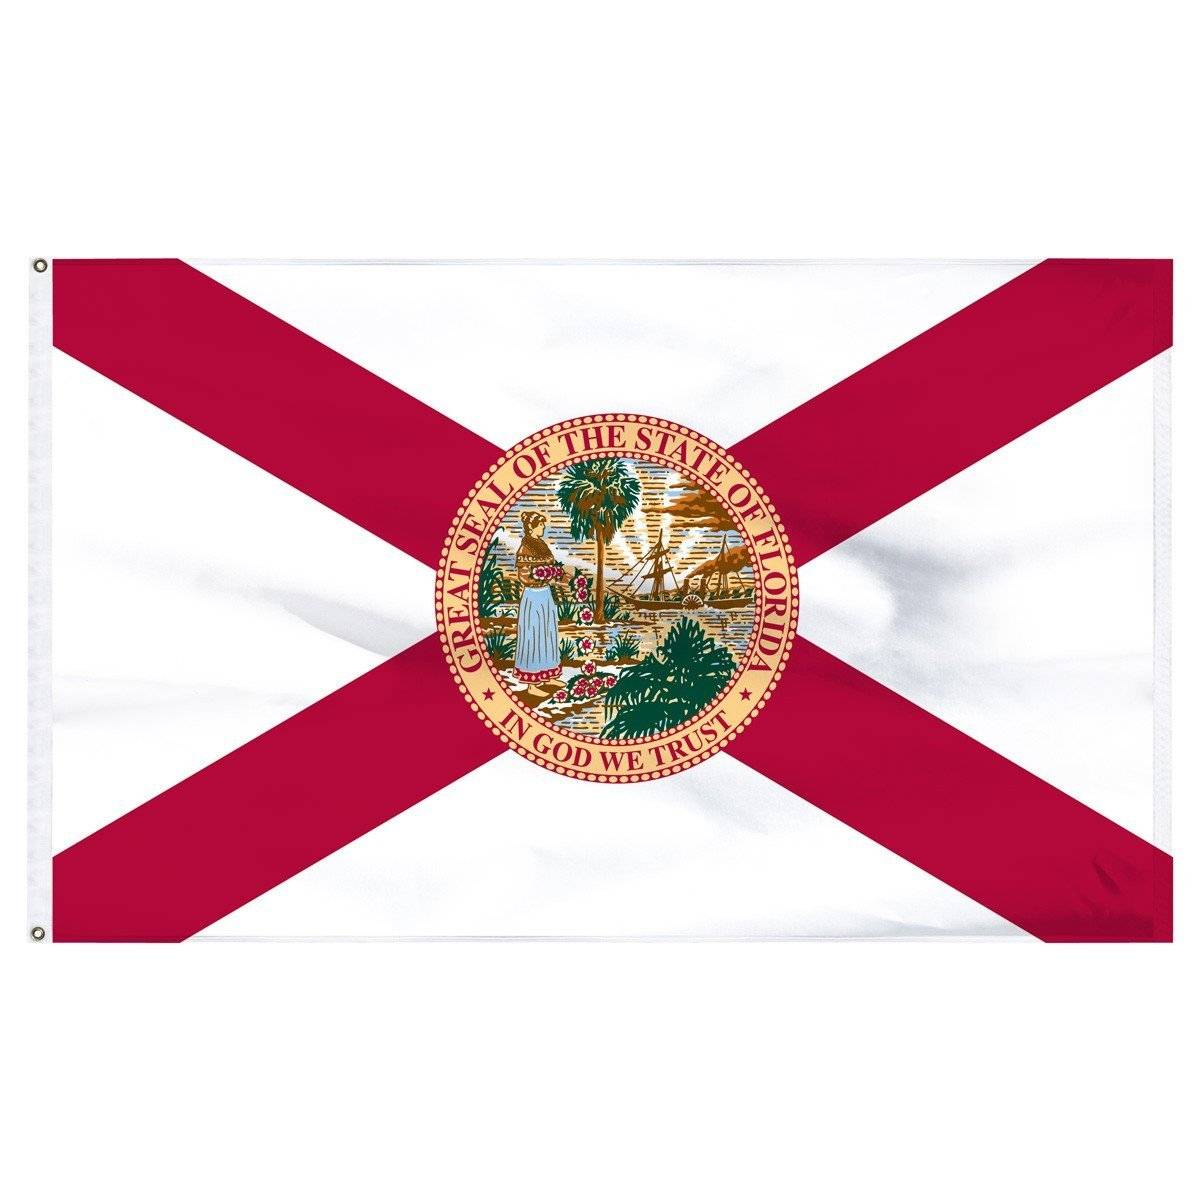 Florida State Flag - Outdoor High Wind - 2 ply Poly Made in USA.